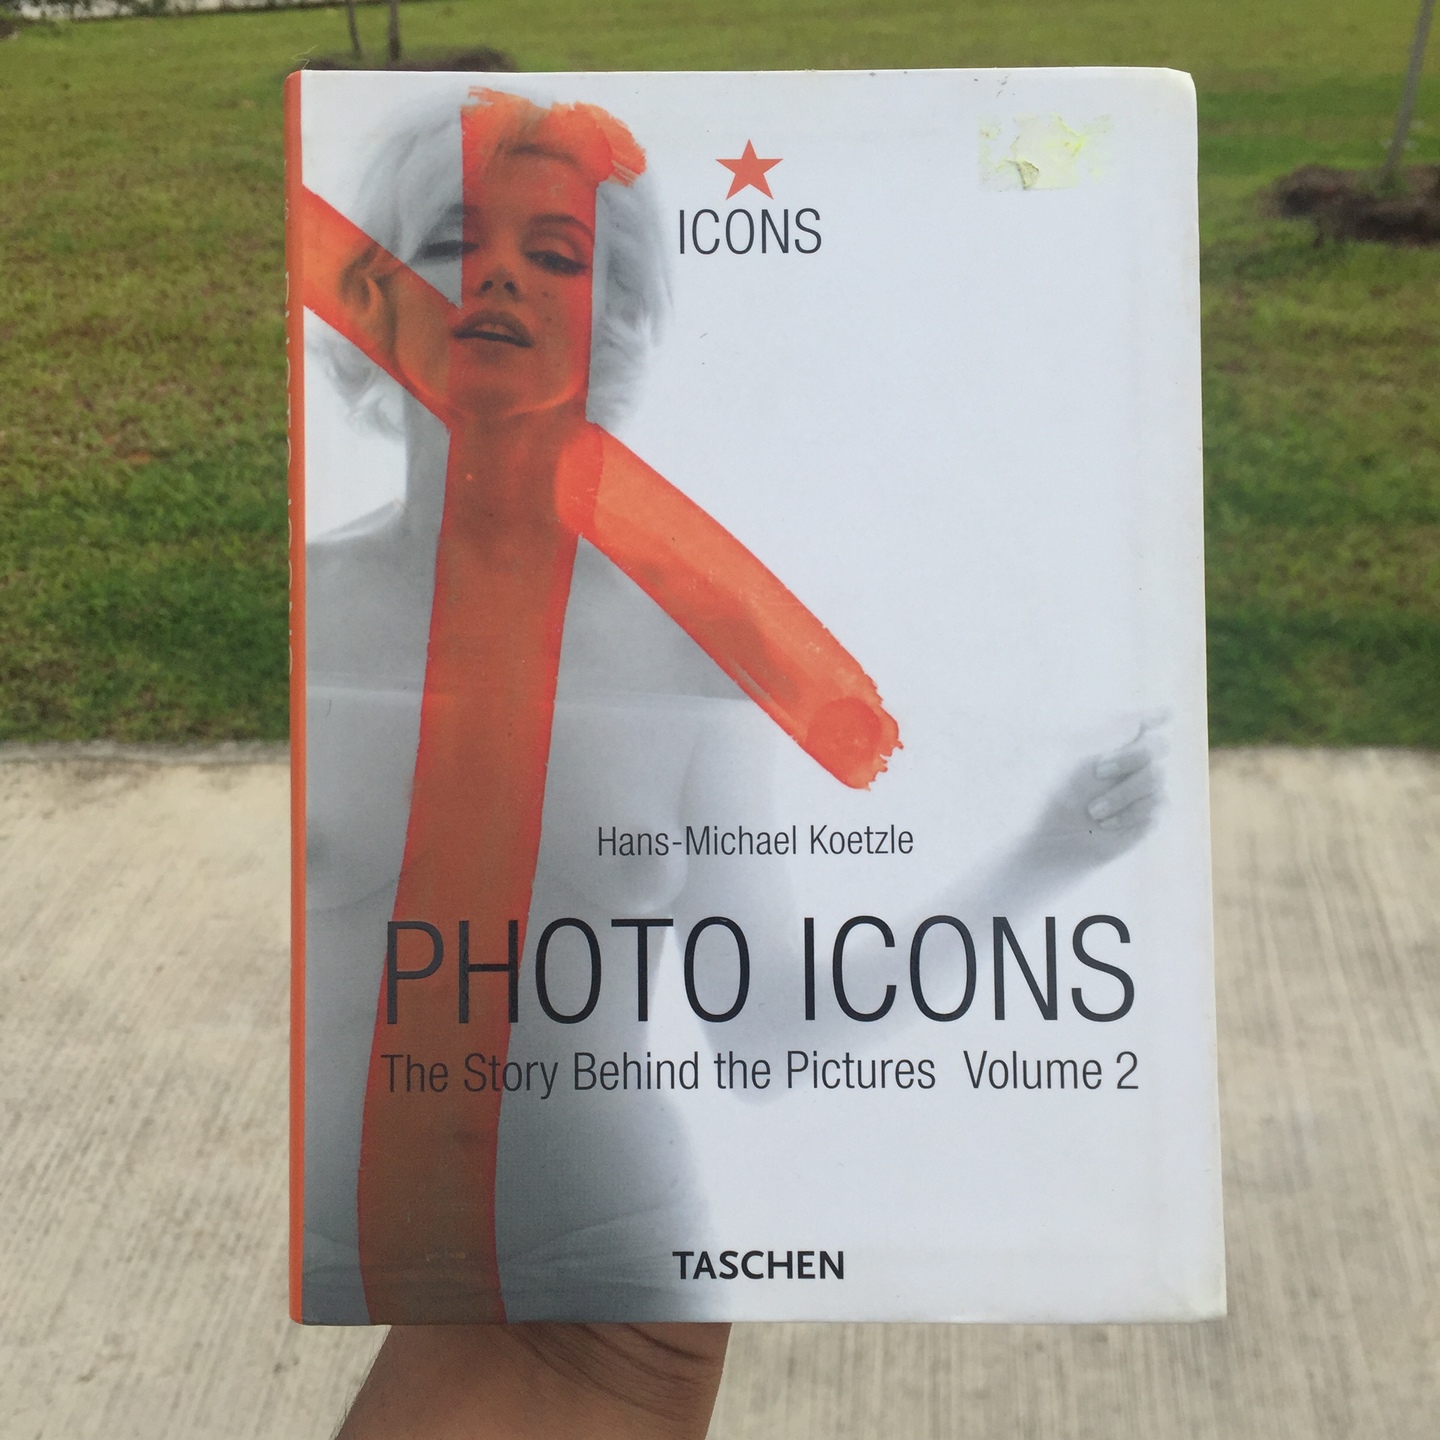 Photo Icons: The Story Behind the Pictures Vol. 2 by Hans-Michael Koetzle [Paperback]